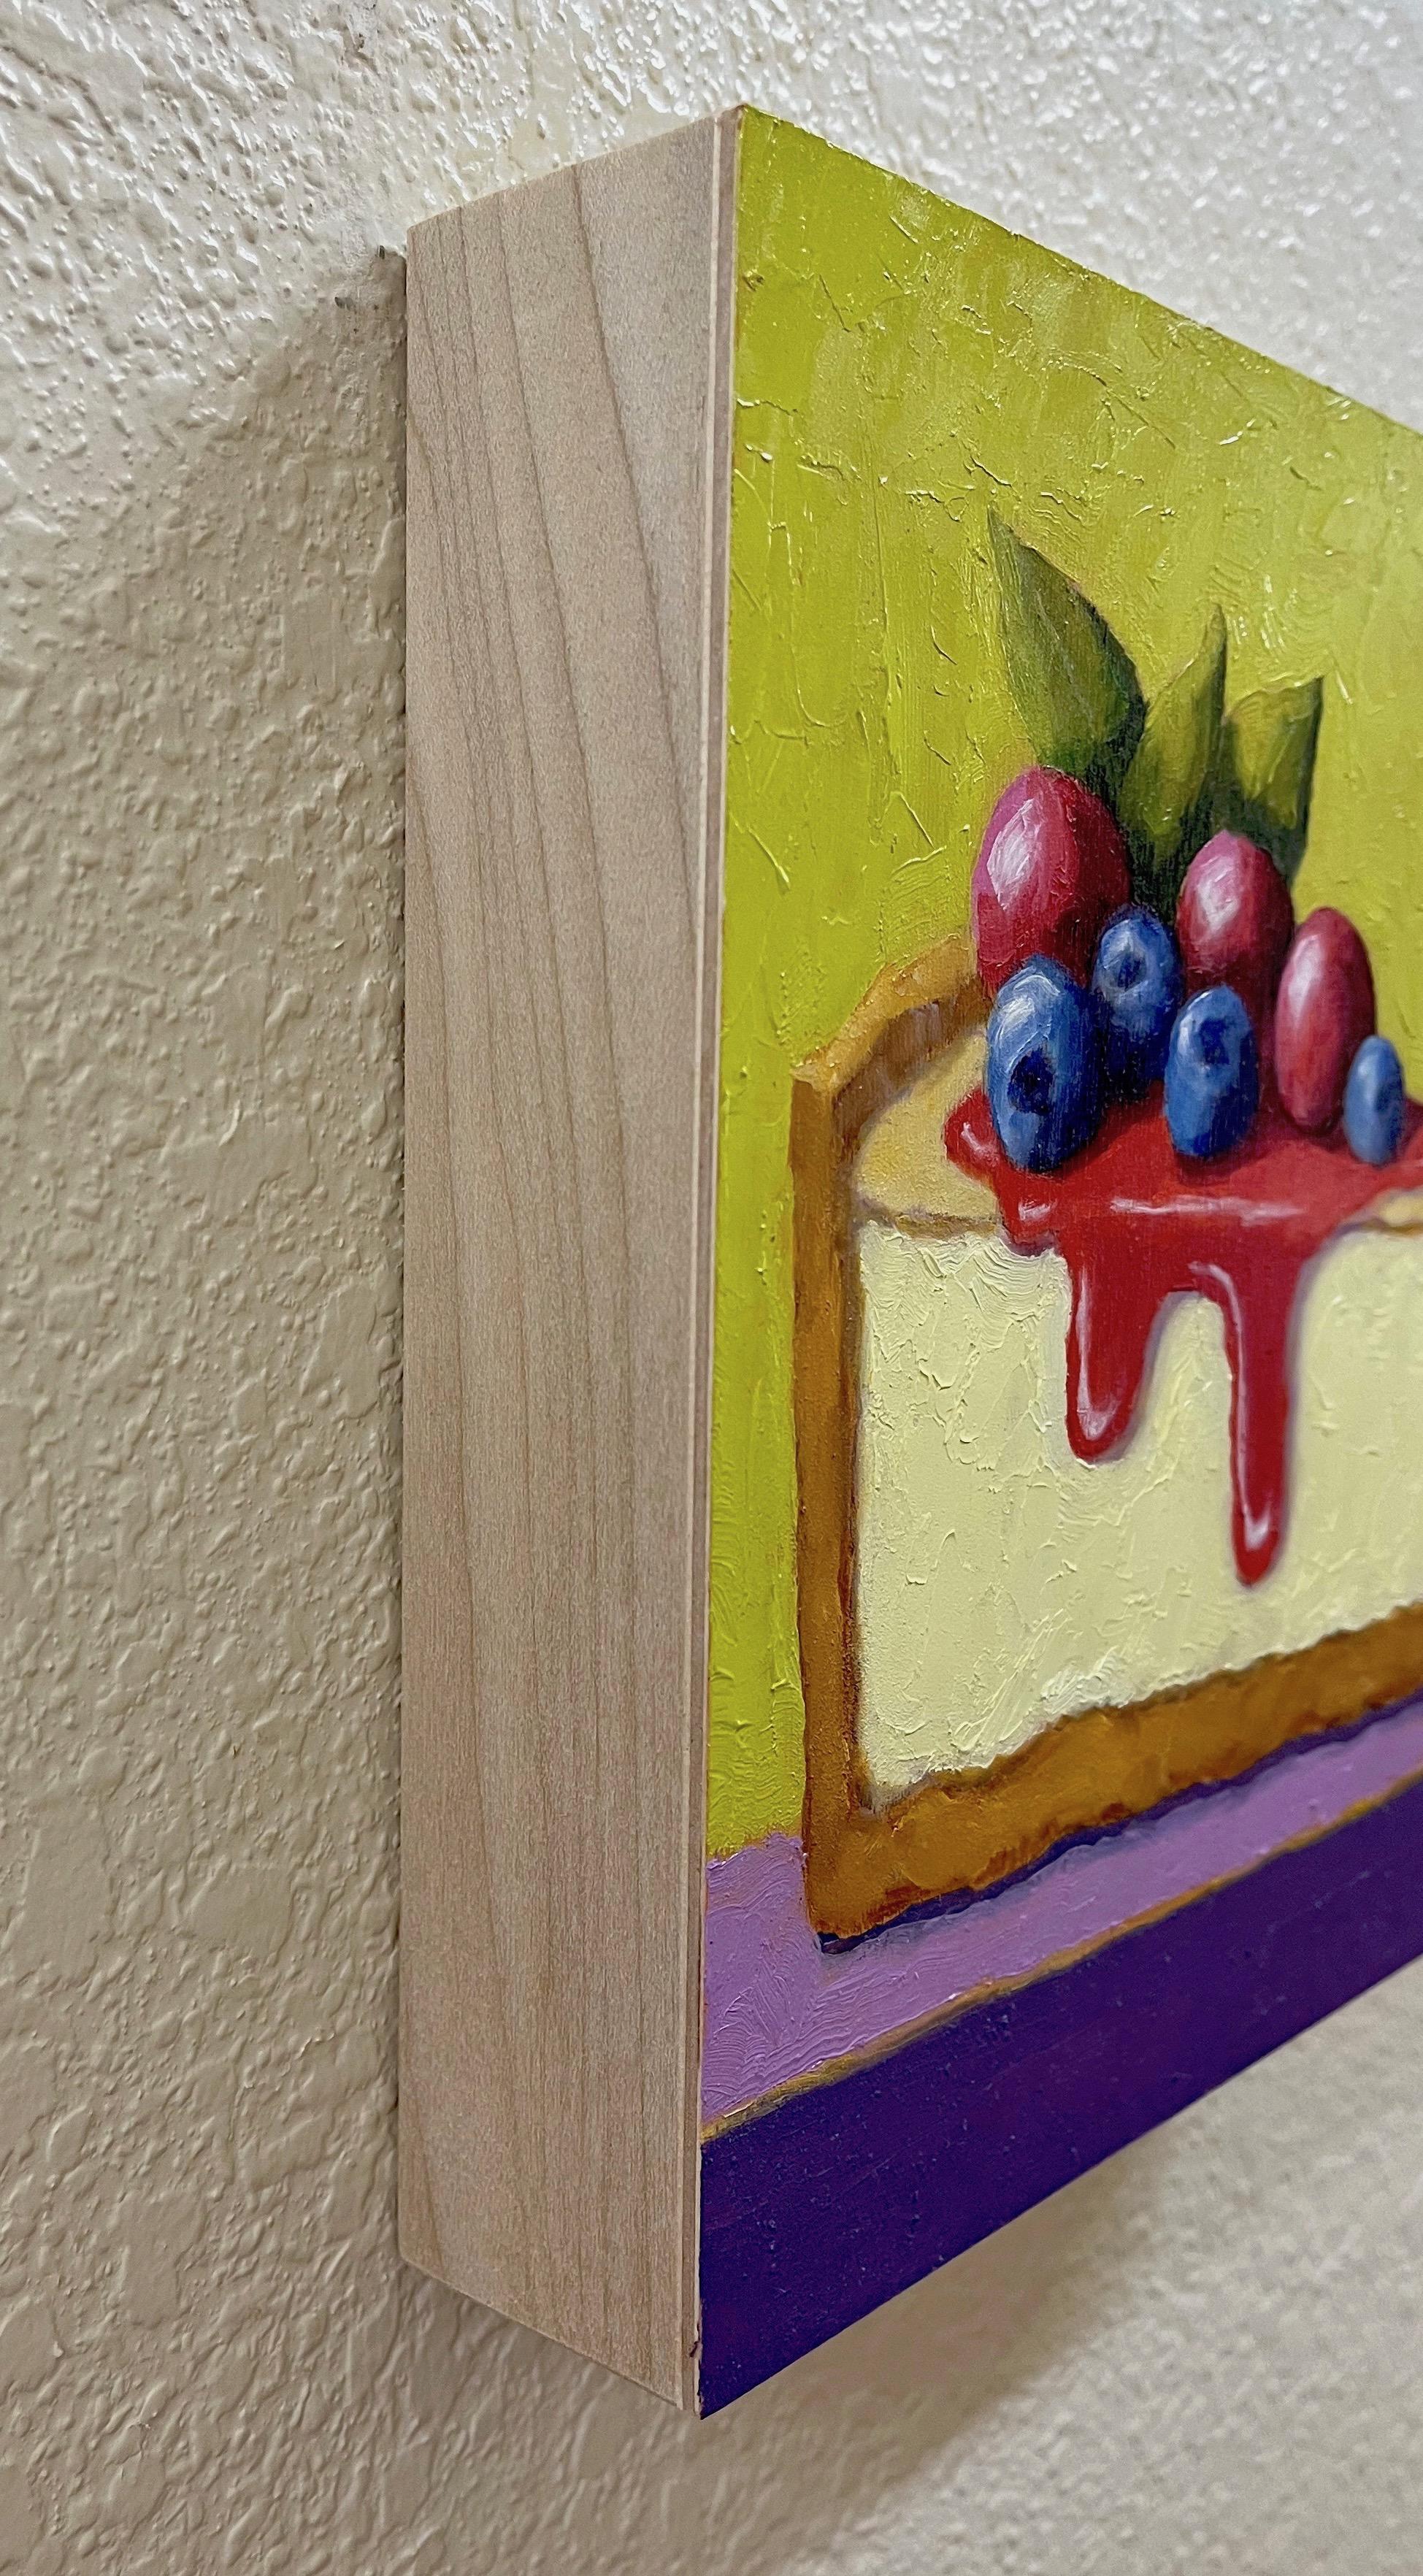 <p>Artist Comments<br>This still-life painting features a slice of cheesecake topped with plump blueberries and cherries. Against a vibrant background, the delectable texture and rich colors of the crumbly crust, silky filling, sweet syrup, and